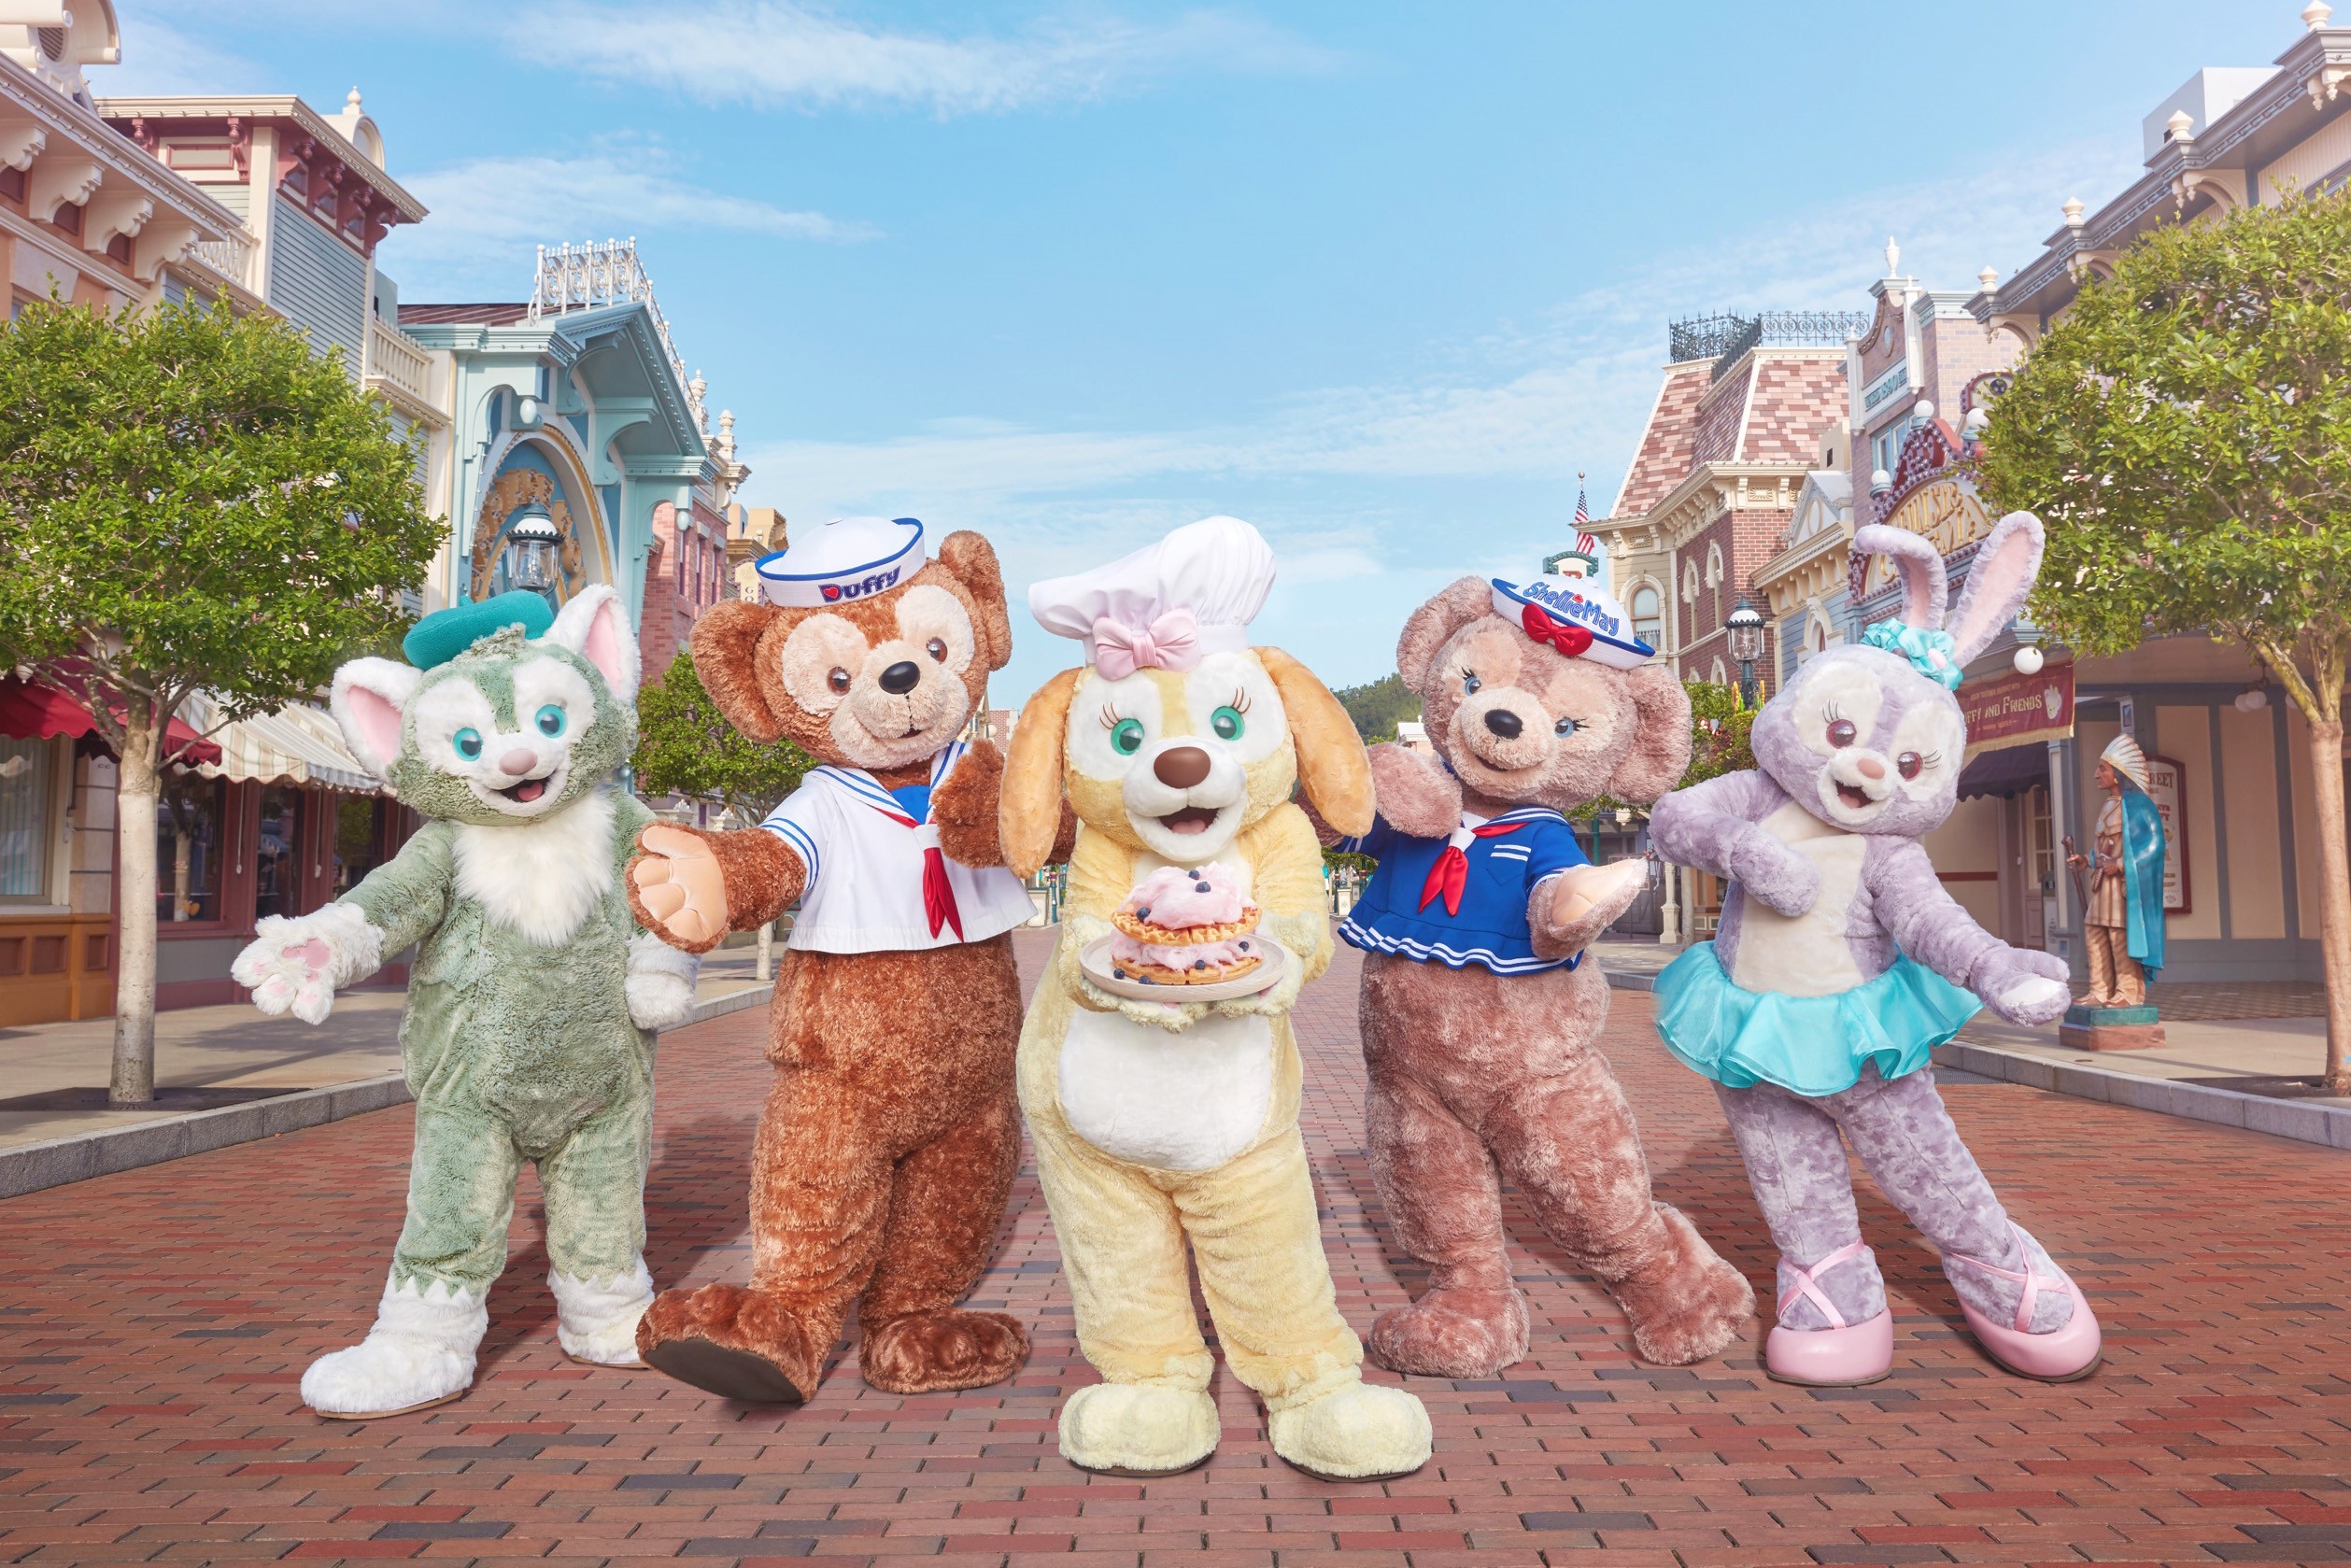 Meet Duffy and Friends | Inquirer Lifestyle